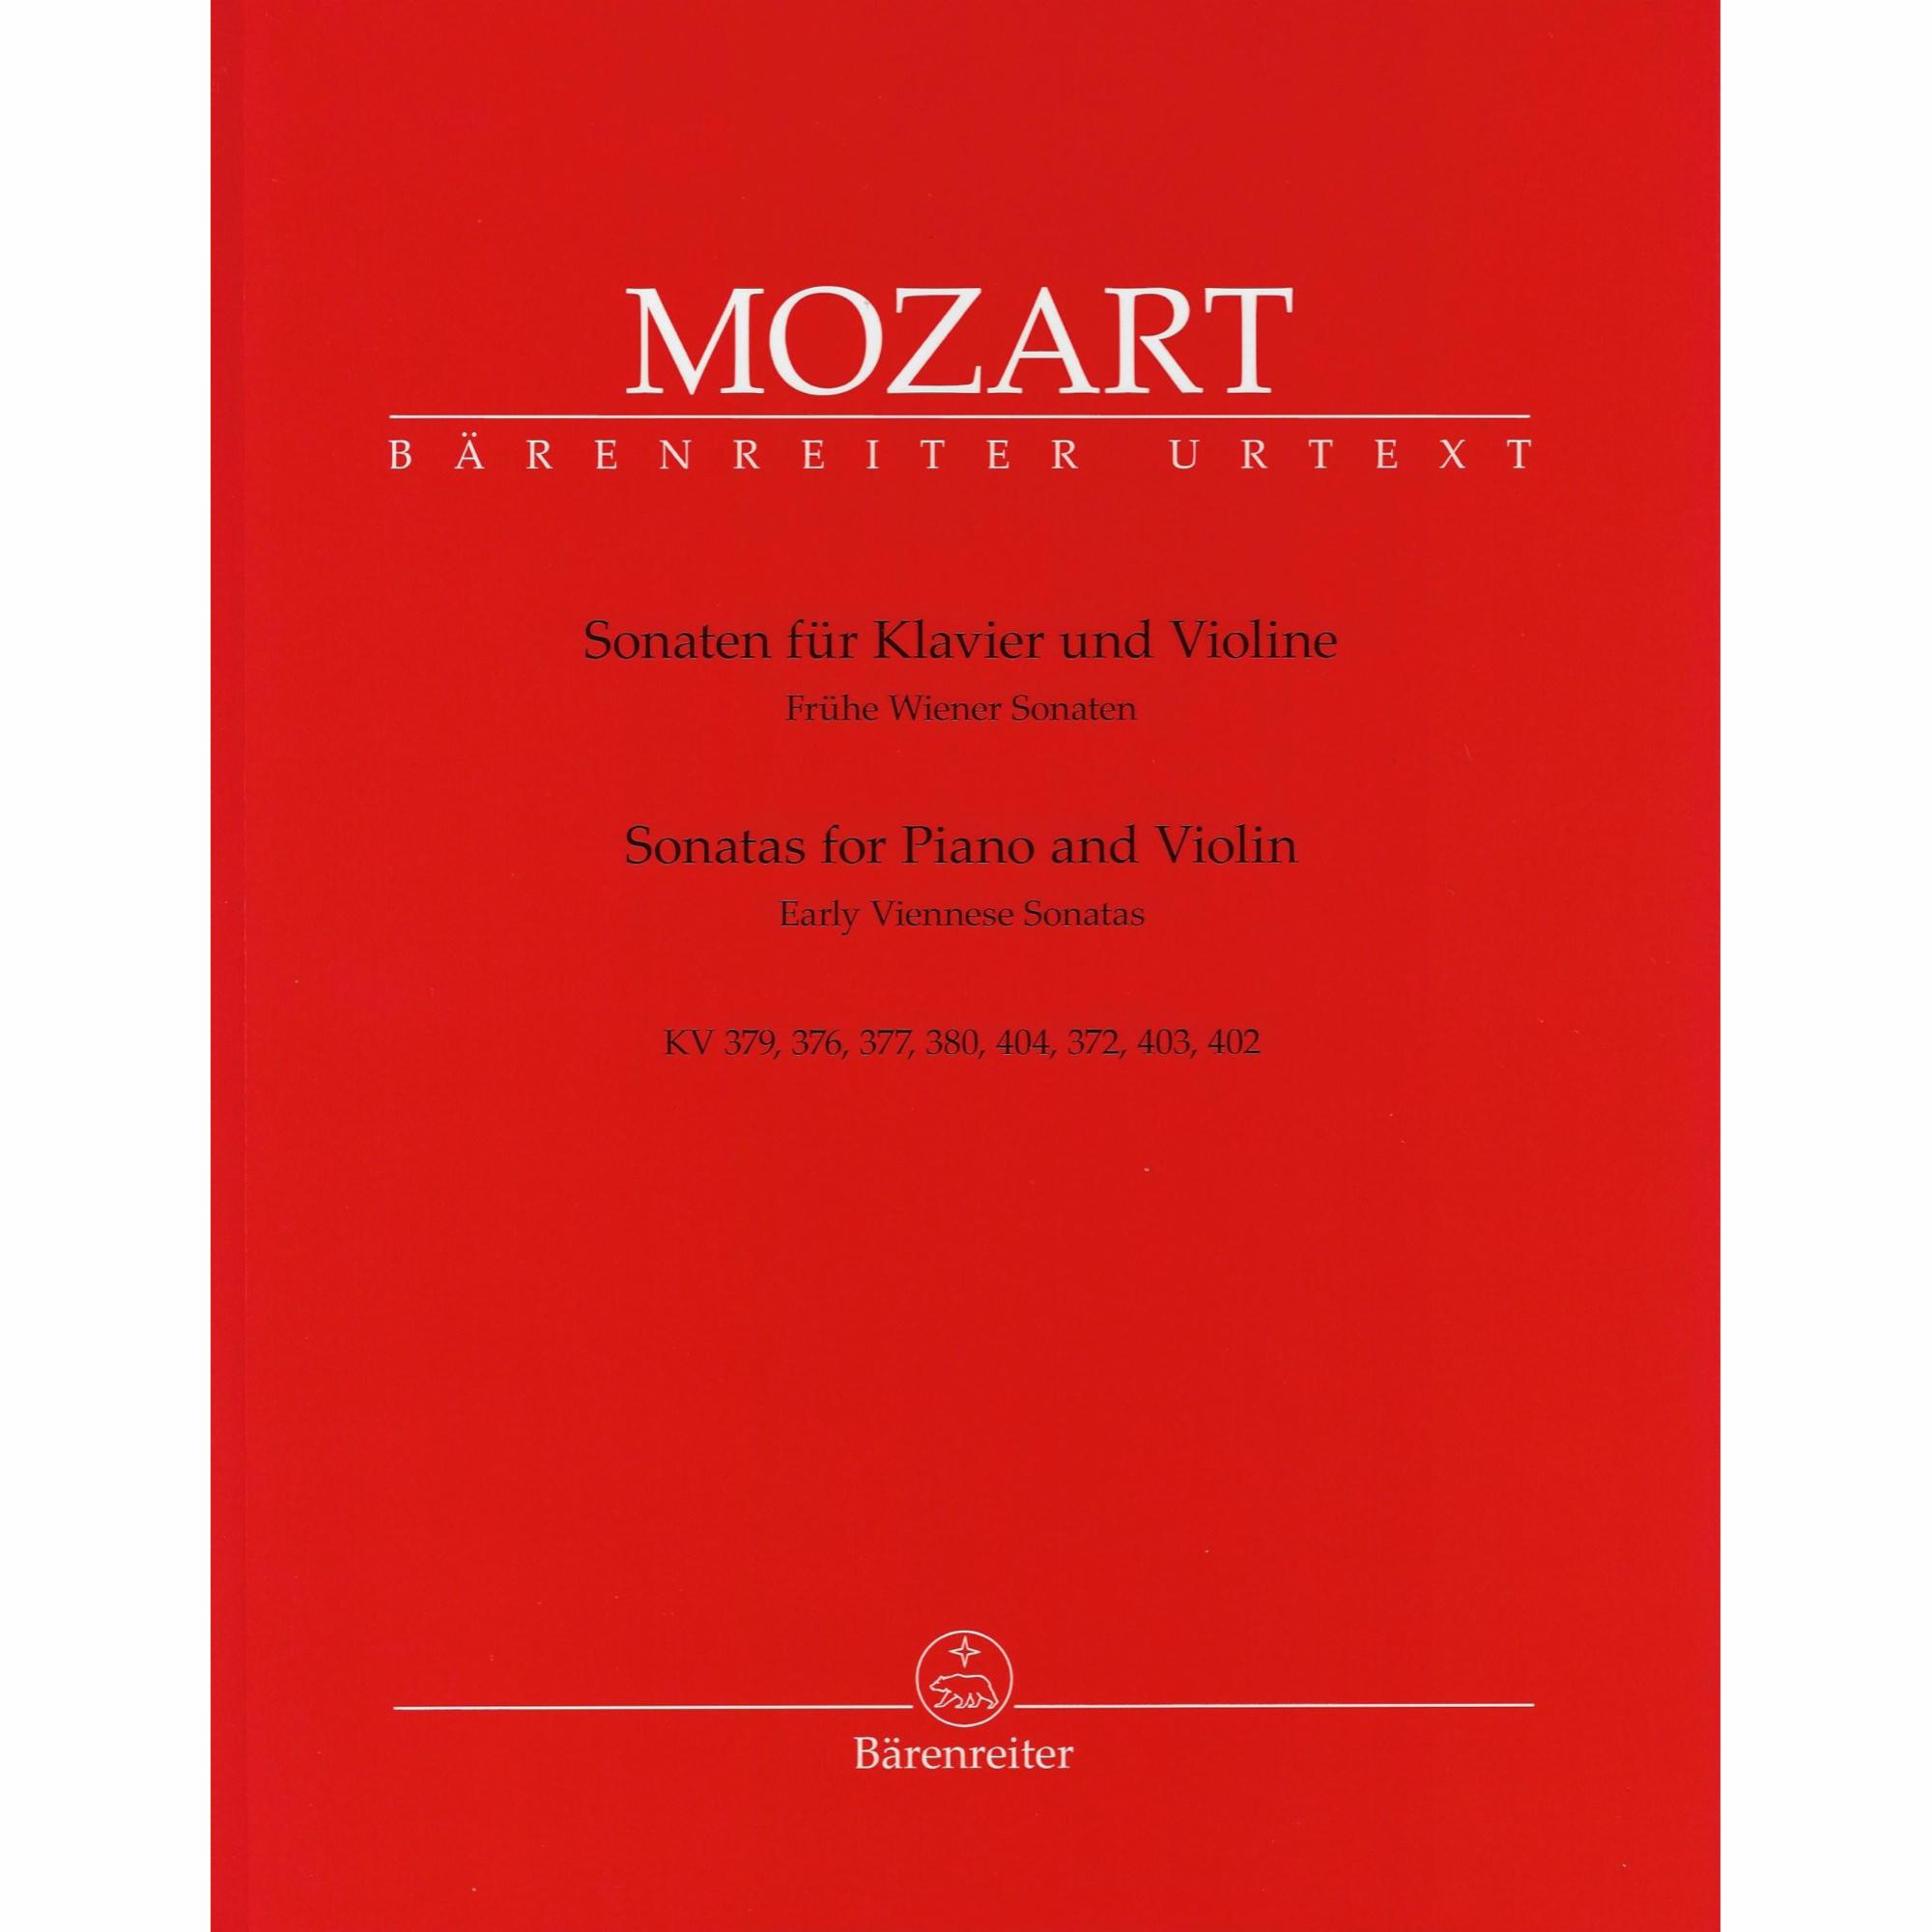 Mozart -- Early Viennese Sonatas for Violin and Piano